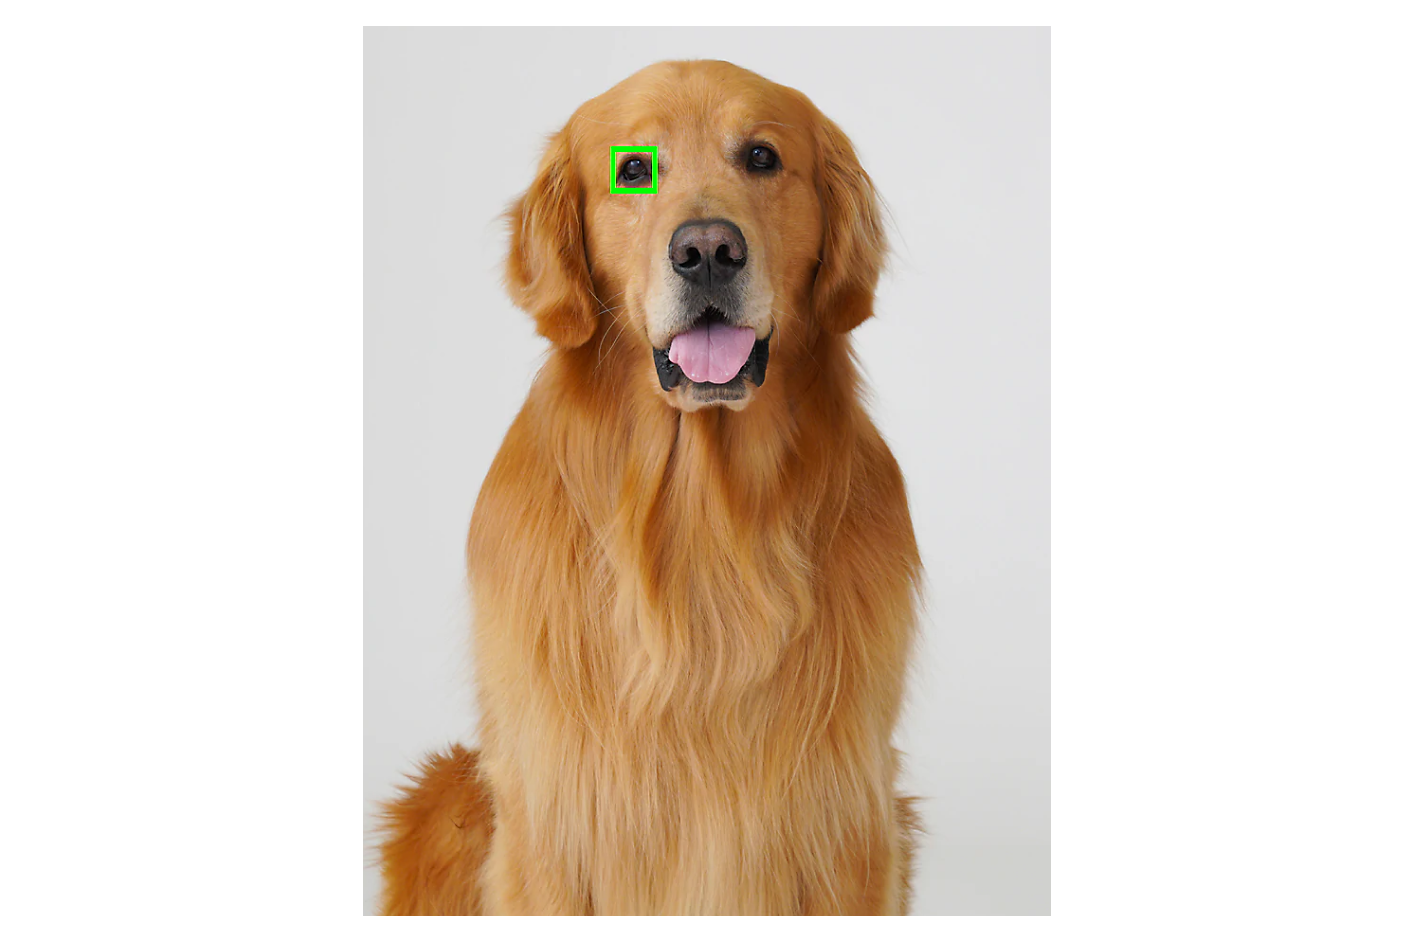 A golden retriever sits against a grey background with a green square framing one eye.